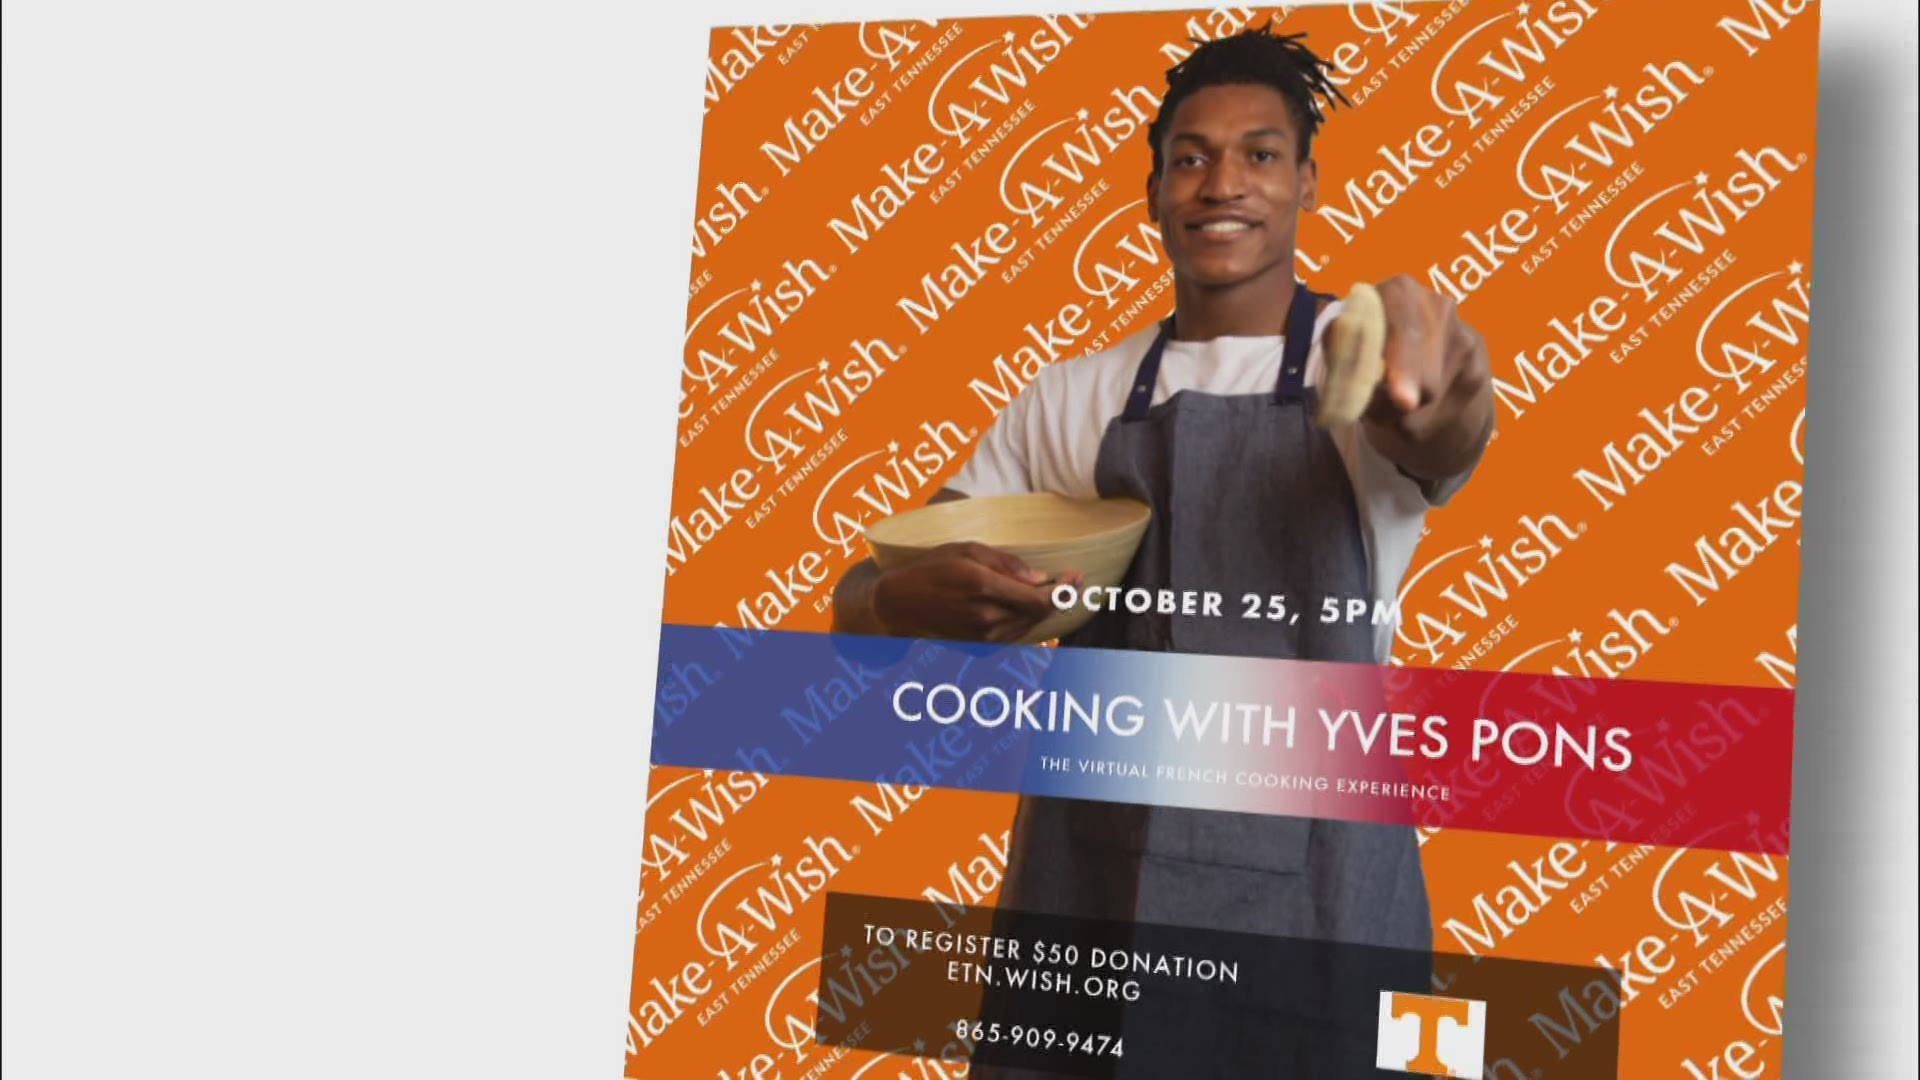 You can cook along with Yves Pons as he demonstrates how to make a famous French dish & dessert.